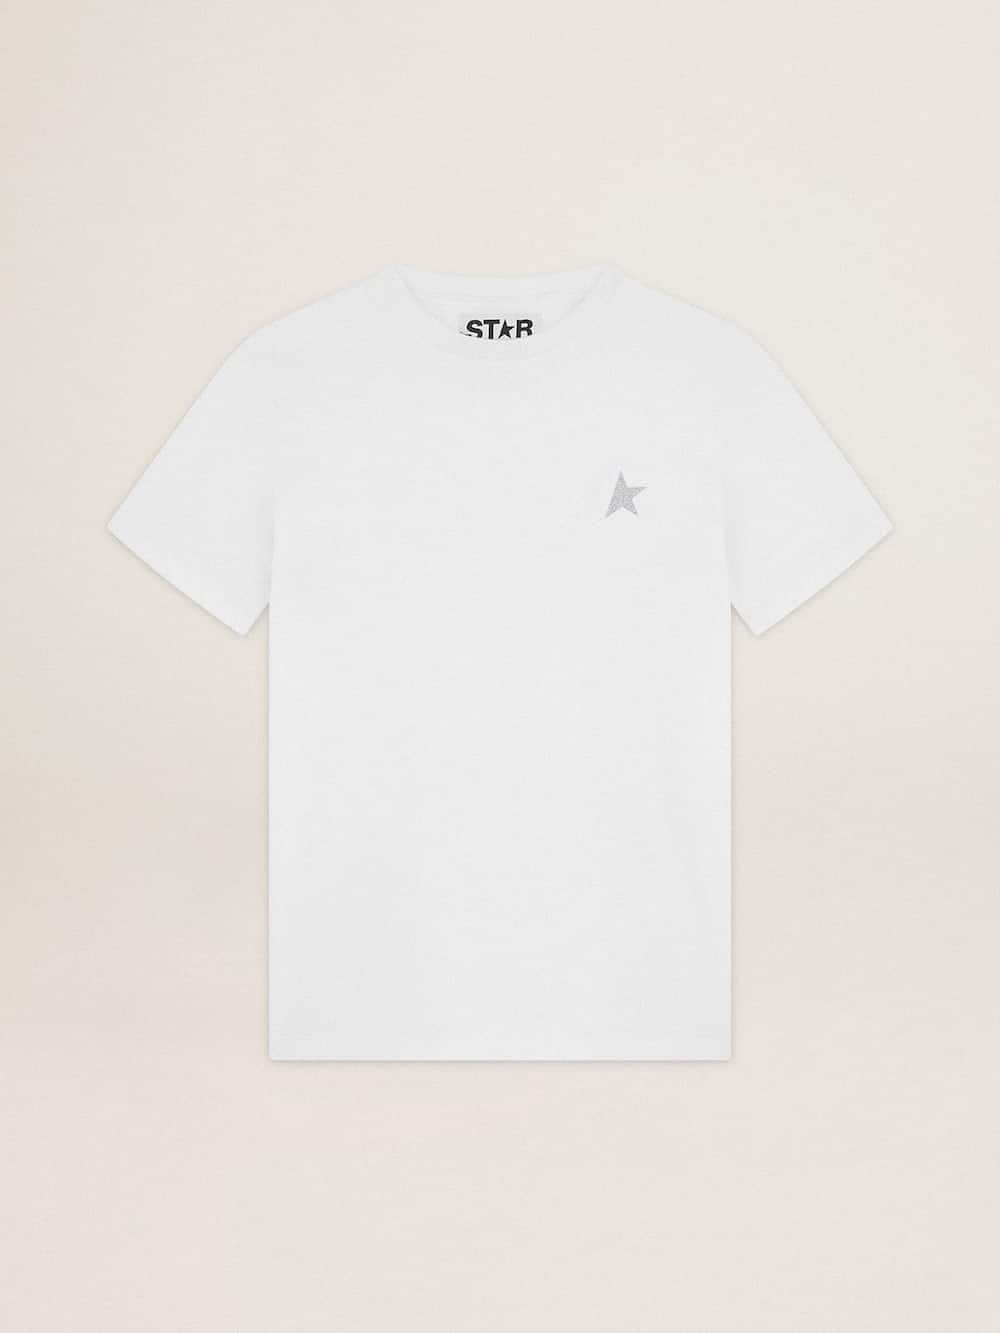 Golden Goose - Women's white T-shirt with silver glitter star on the front in 